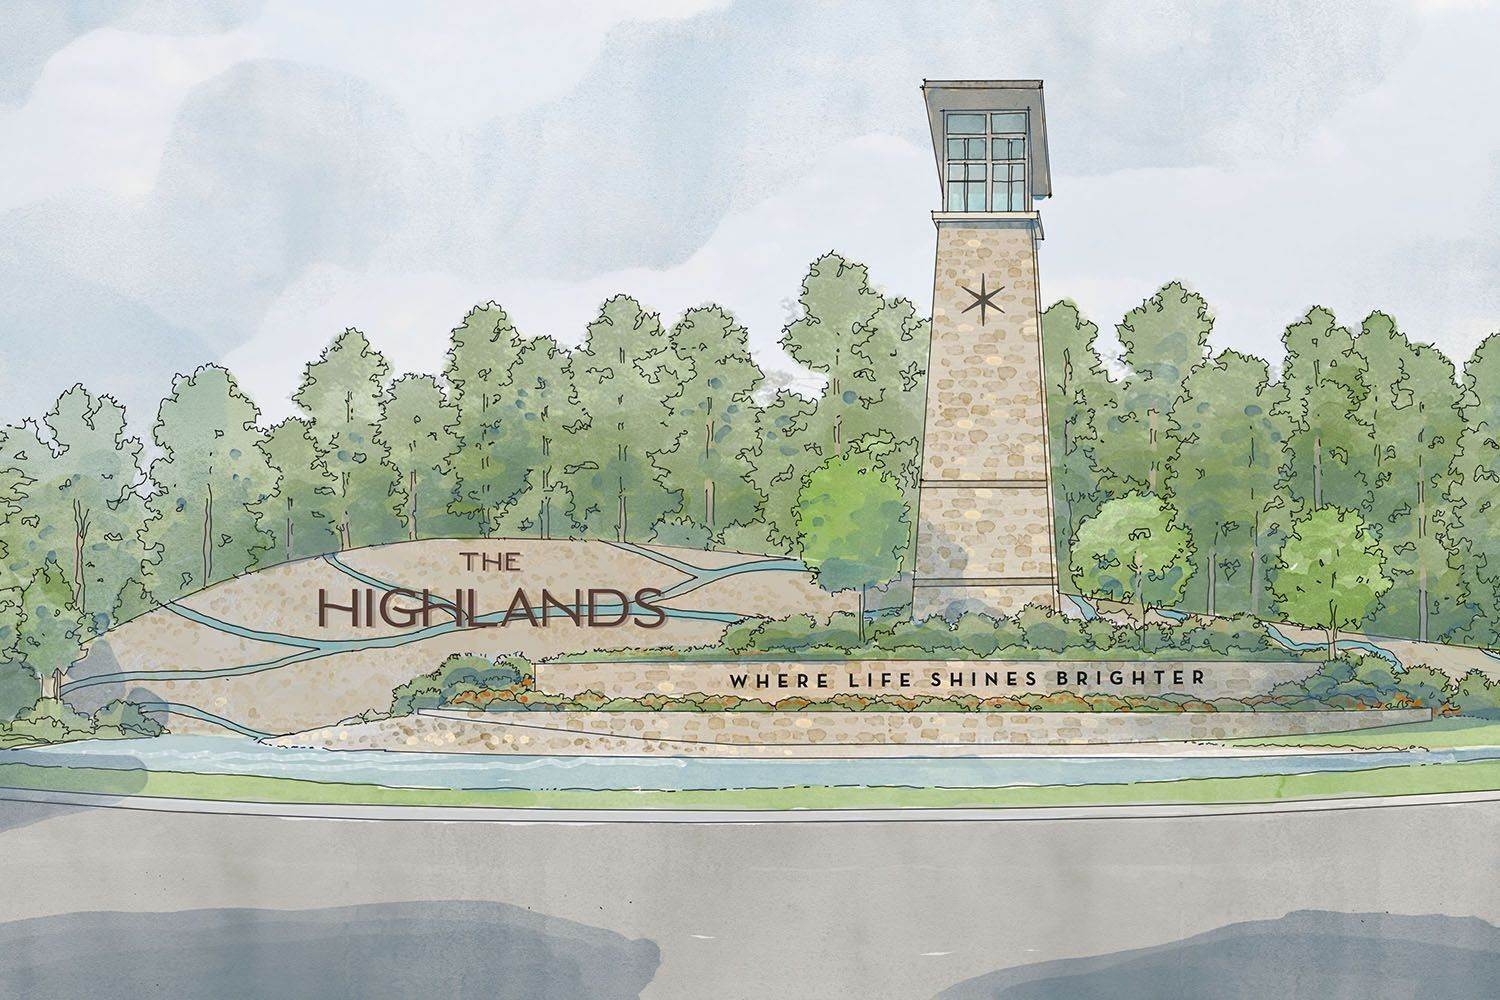 2. The Highlands 60' building at 21738 Grayson Highlands Way, Porter, TX 77365